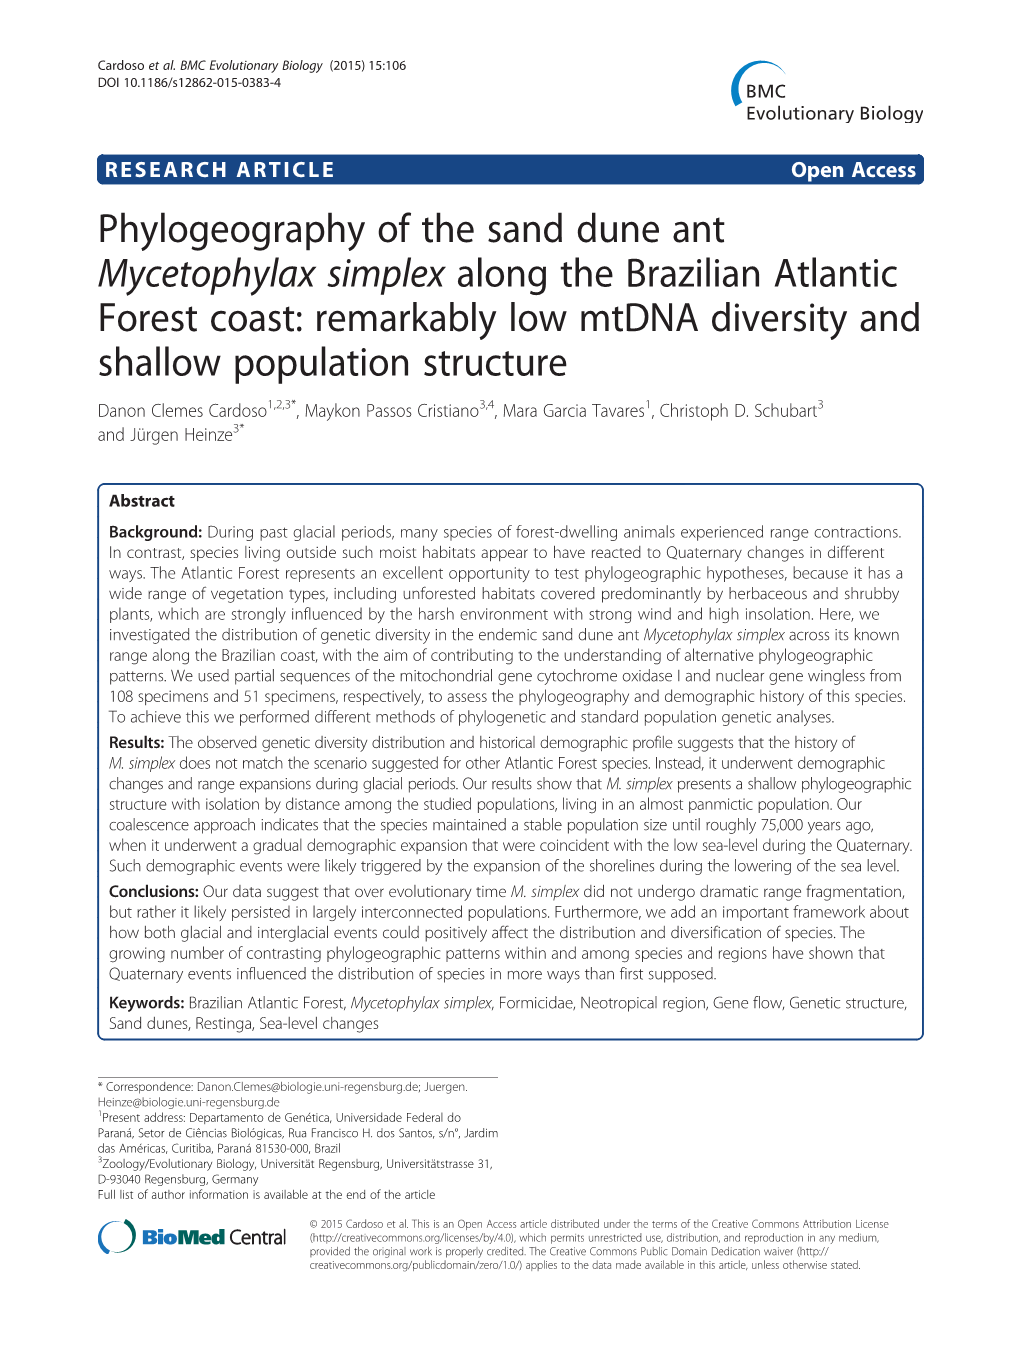 Phylogeography of the Sand Dune Ant Mycetophylax